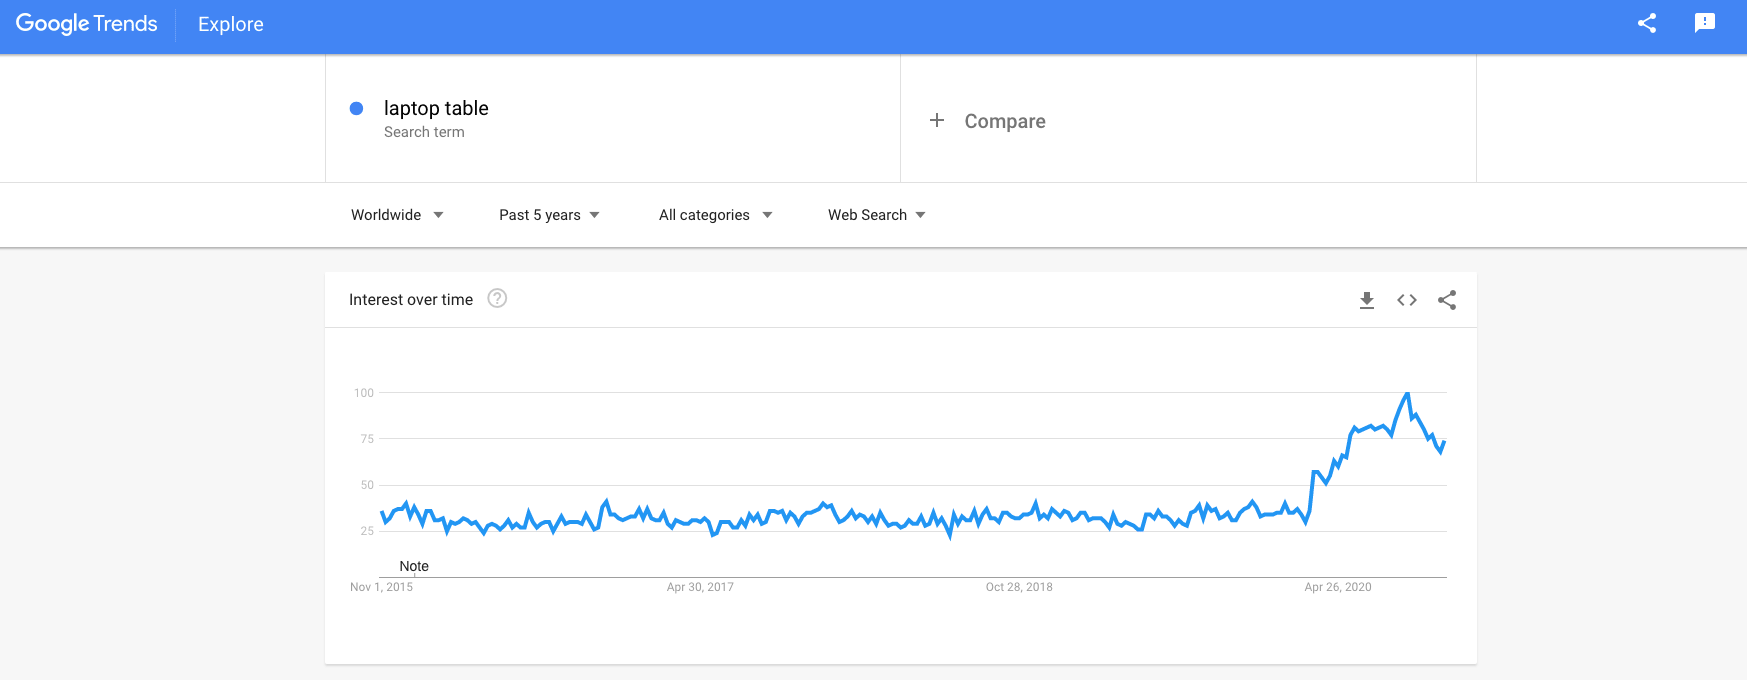 a screenshot showing the trend of buying remote work supplies